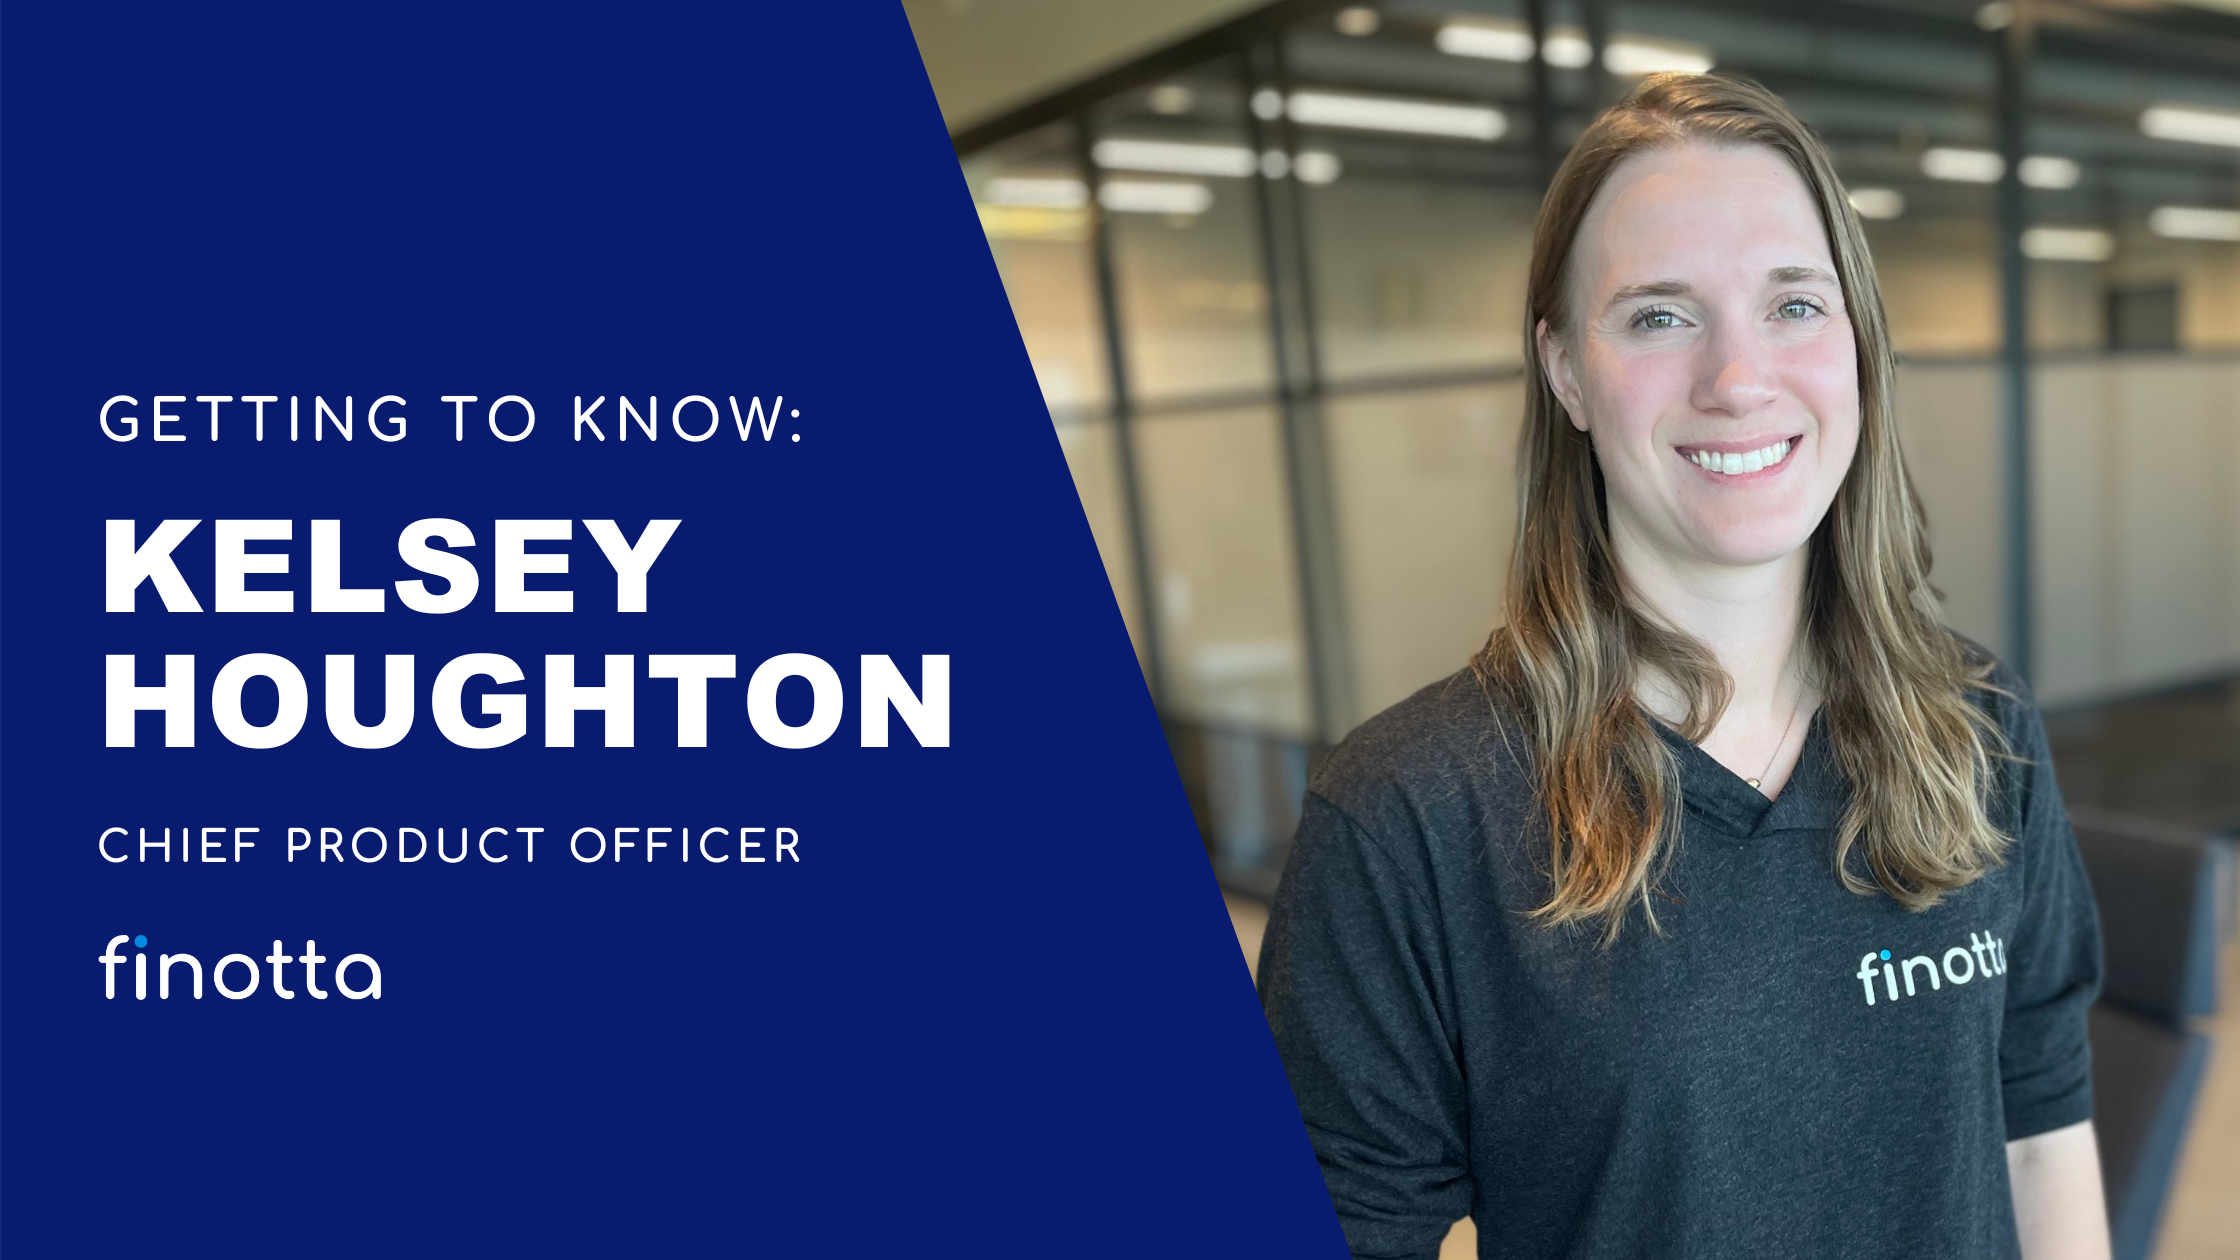 Getting to Know: Kelsey Houghton, Chief Product Officer